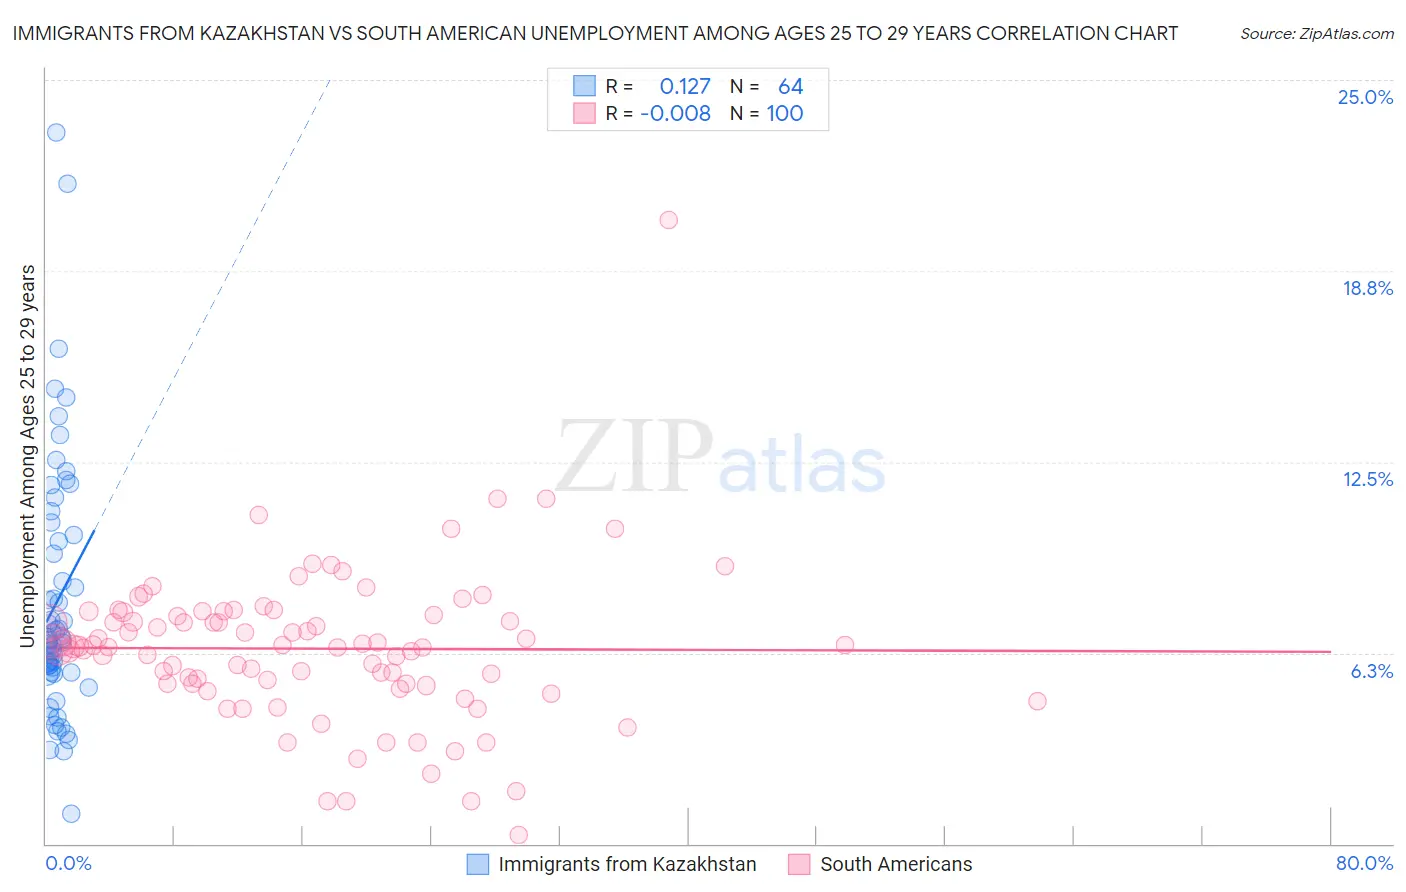 Immigrants from Kazakhstan vs South American Unemployment Among Ages 25 to 29 years